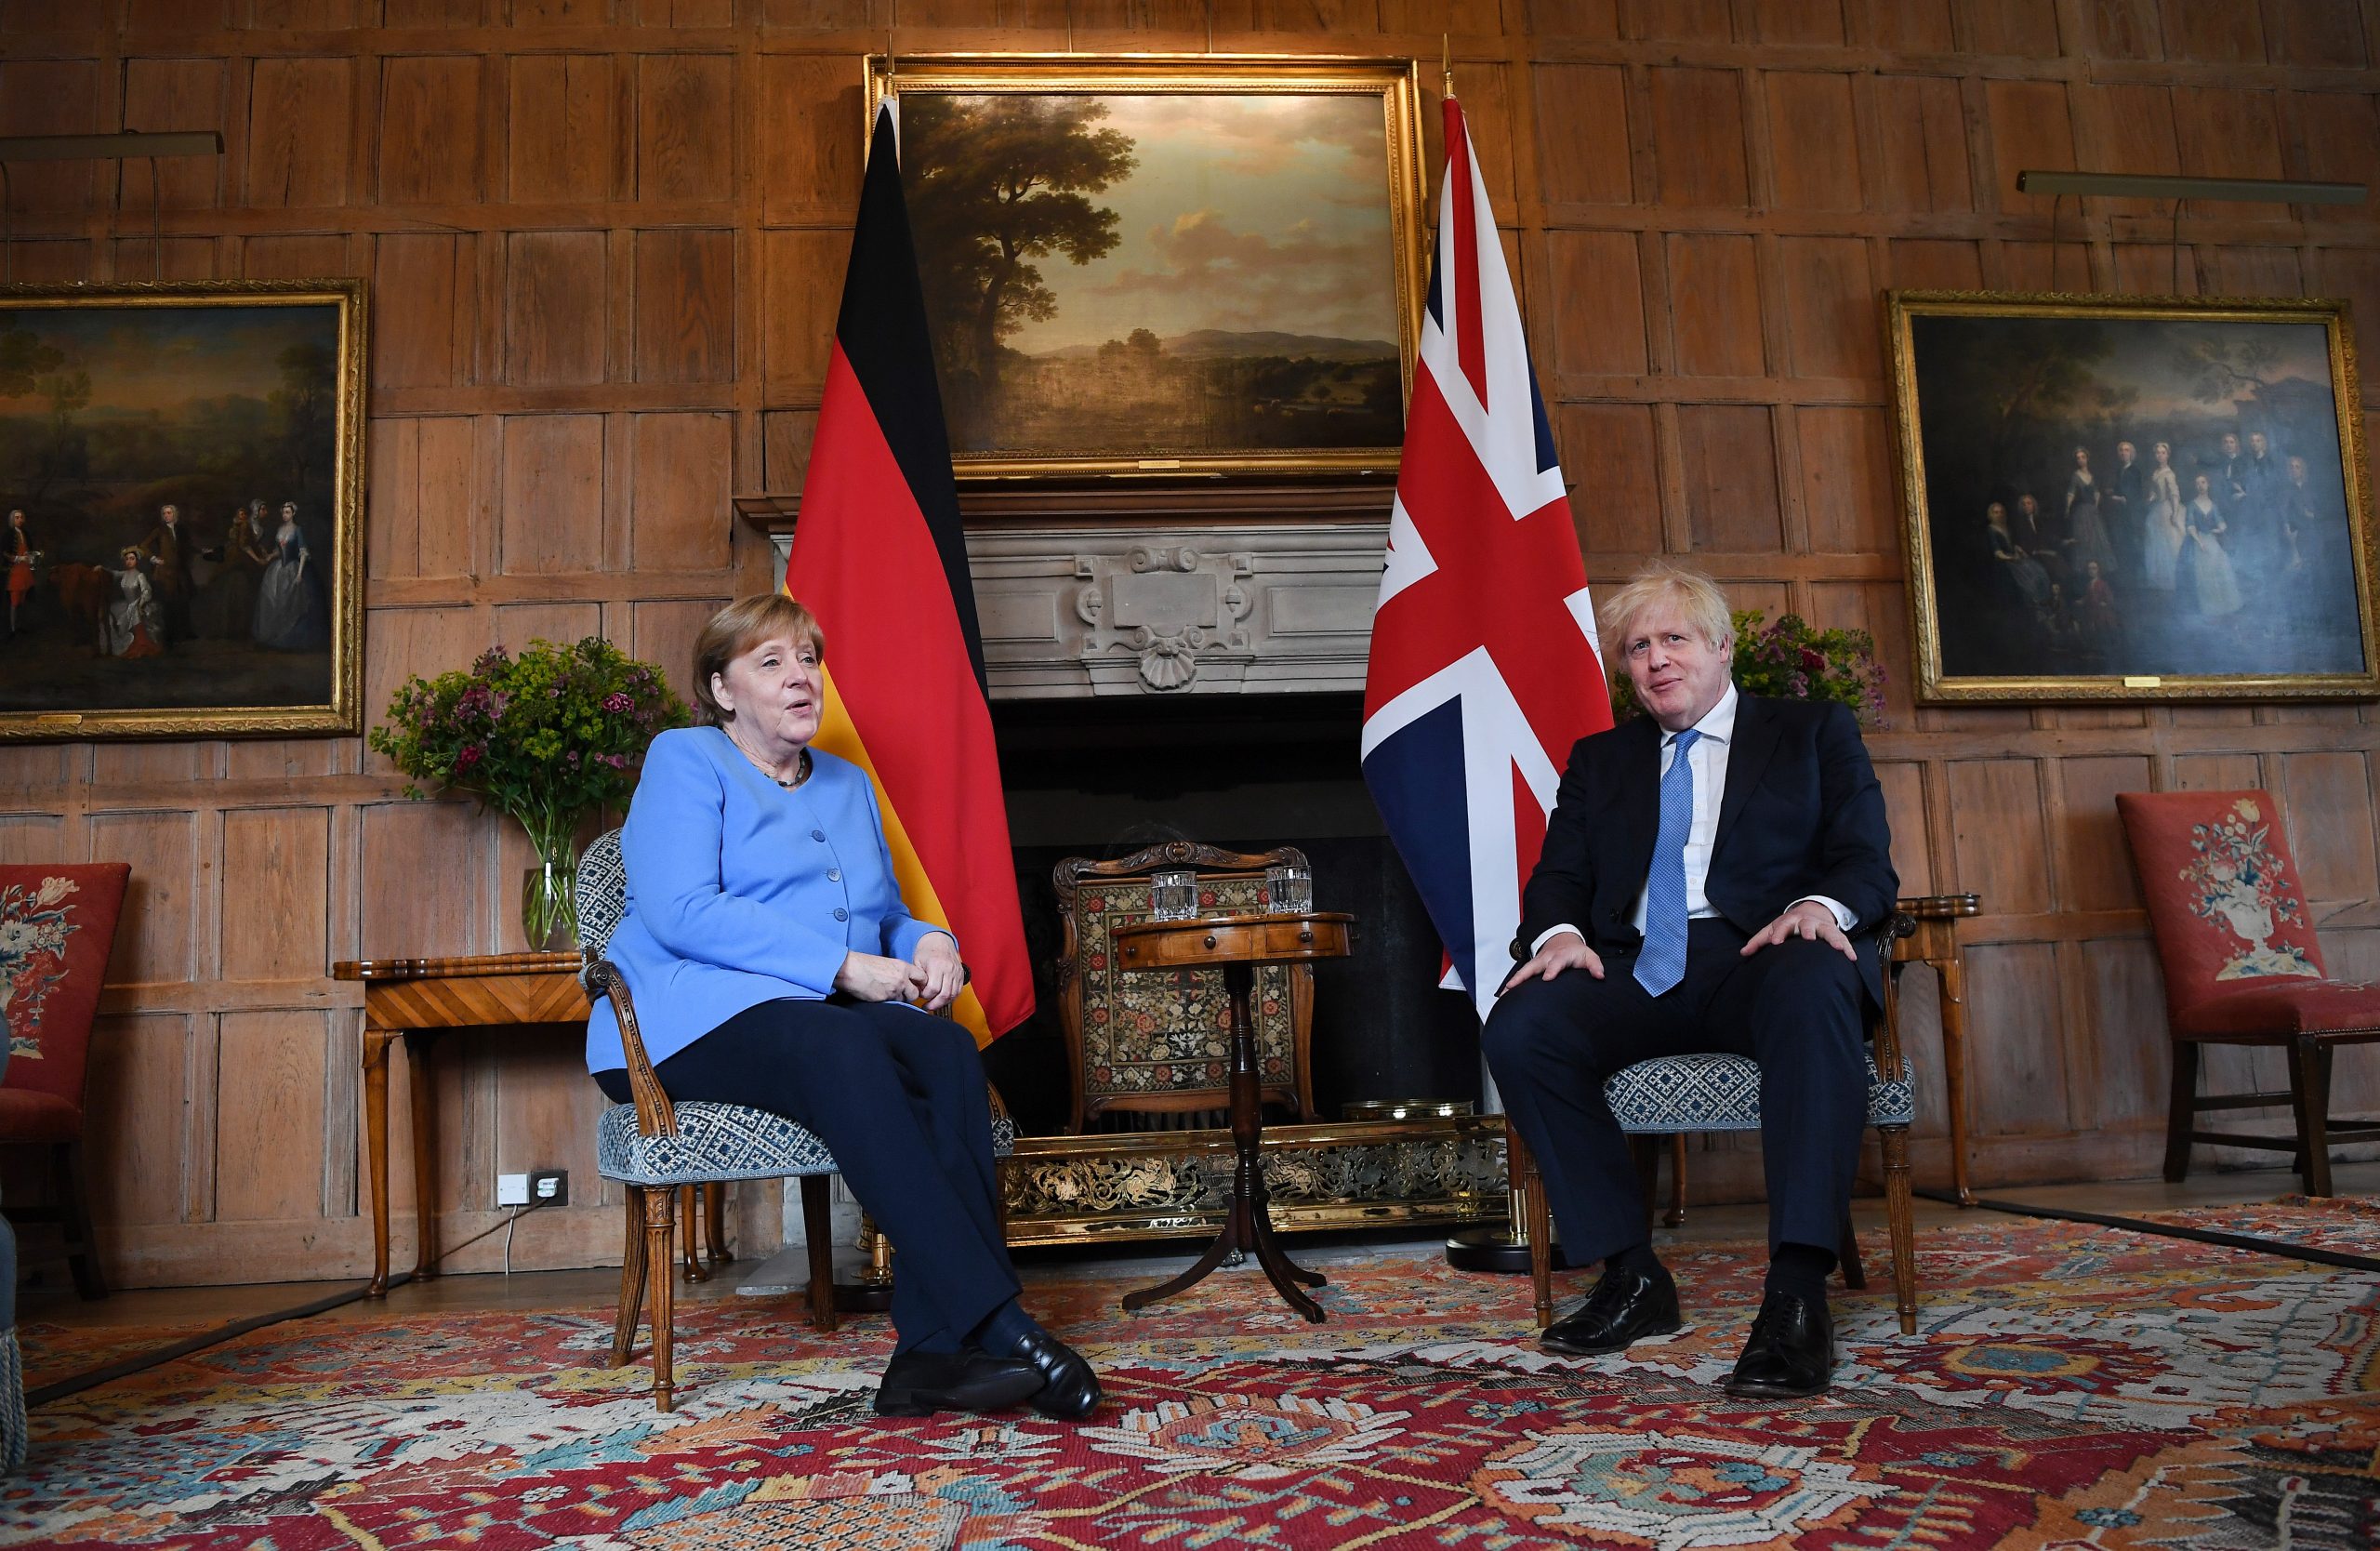 epa09317259 British Prime Minister Boris Johnson (R) with German Chancellor Angela Merkel (L) at the Prime Minster's country residence at Chequers, Buckinghamshire, Britain, 02 July 2021. The two nations have agreed a post Brexit joint declaration on foreign and security policy cooperation. The bilateral agreement is the first to be struck between London and Berlin on foreign and security policy issues.  EPA/ANDY RAIN